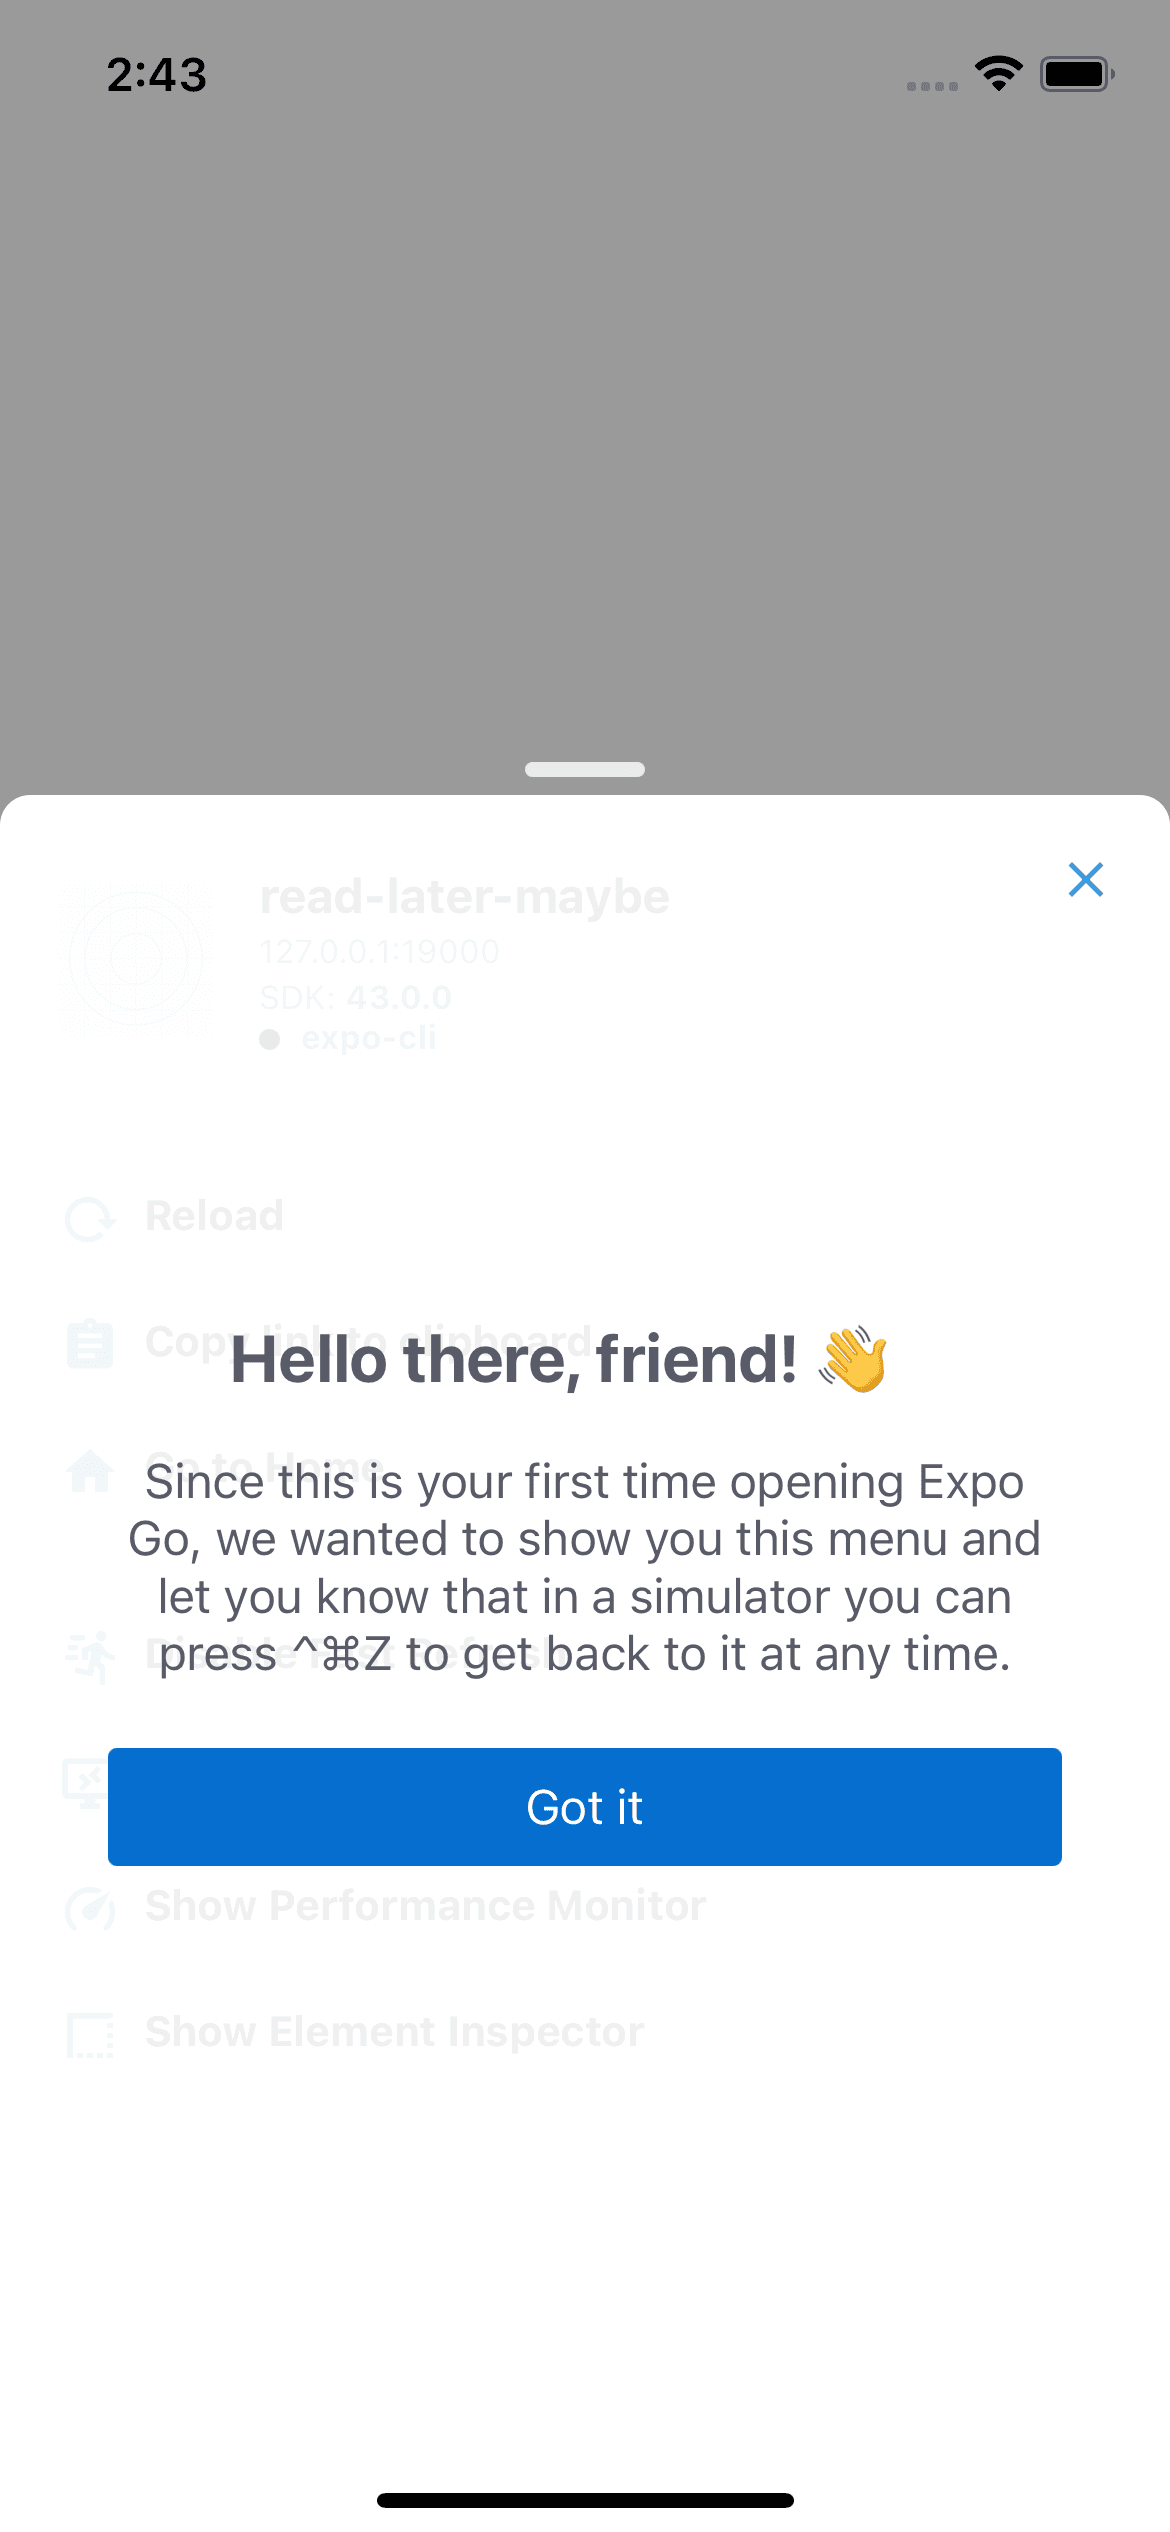 1st time we open the app in Expo, we get a welcome message “Hello there, friend”